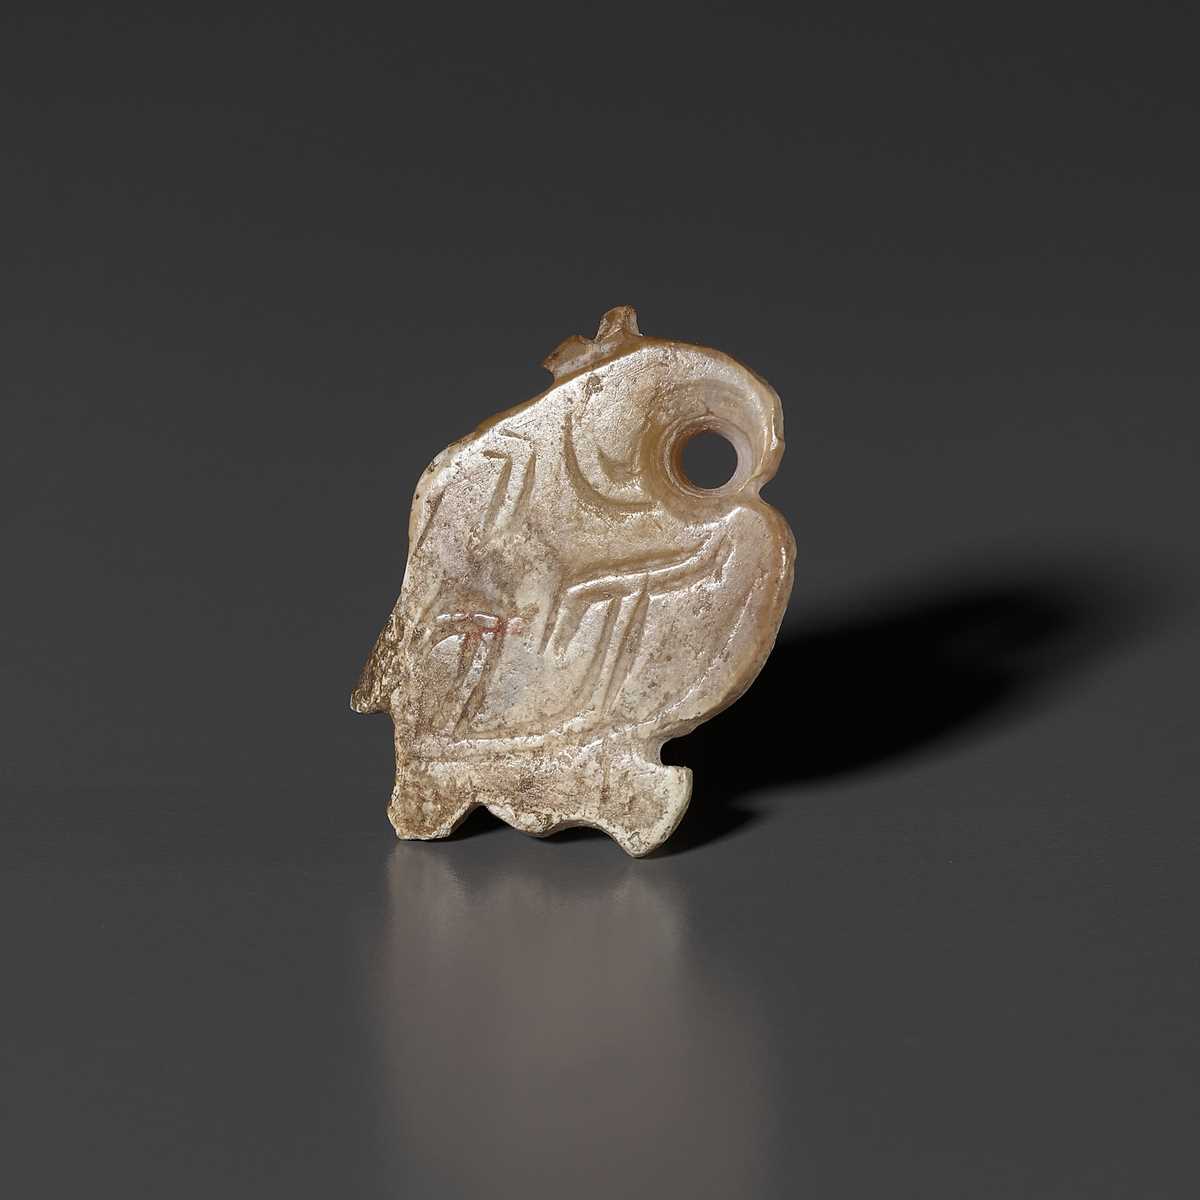 Lot 1025 - A PALE CELADON AND RUSSET JADE ‘BIRD’ PENDANT, LATE SHANG DYNASTY